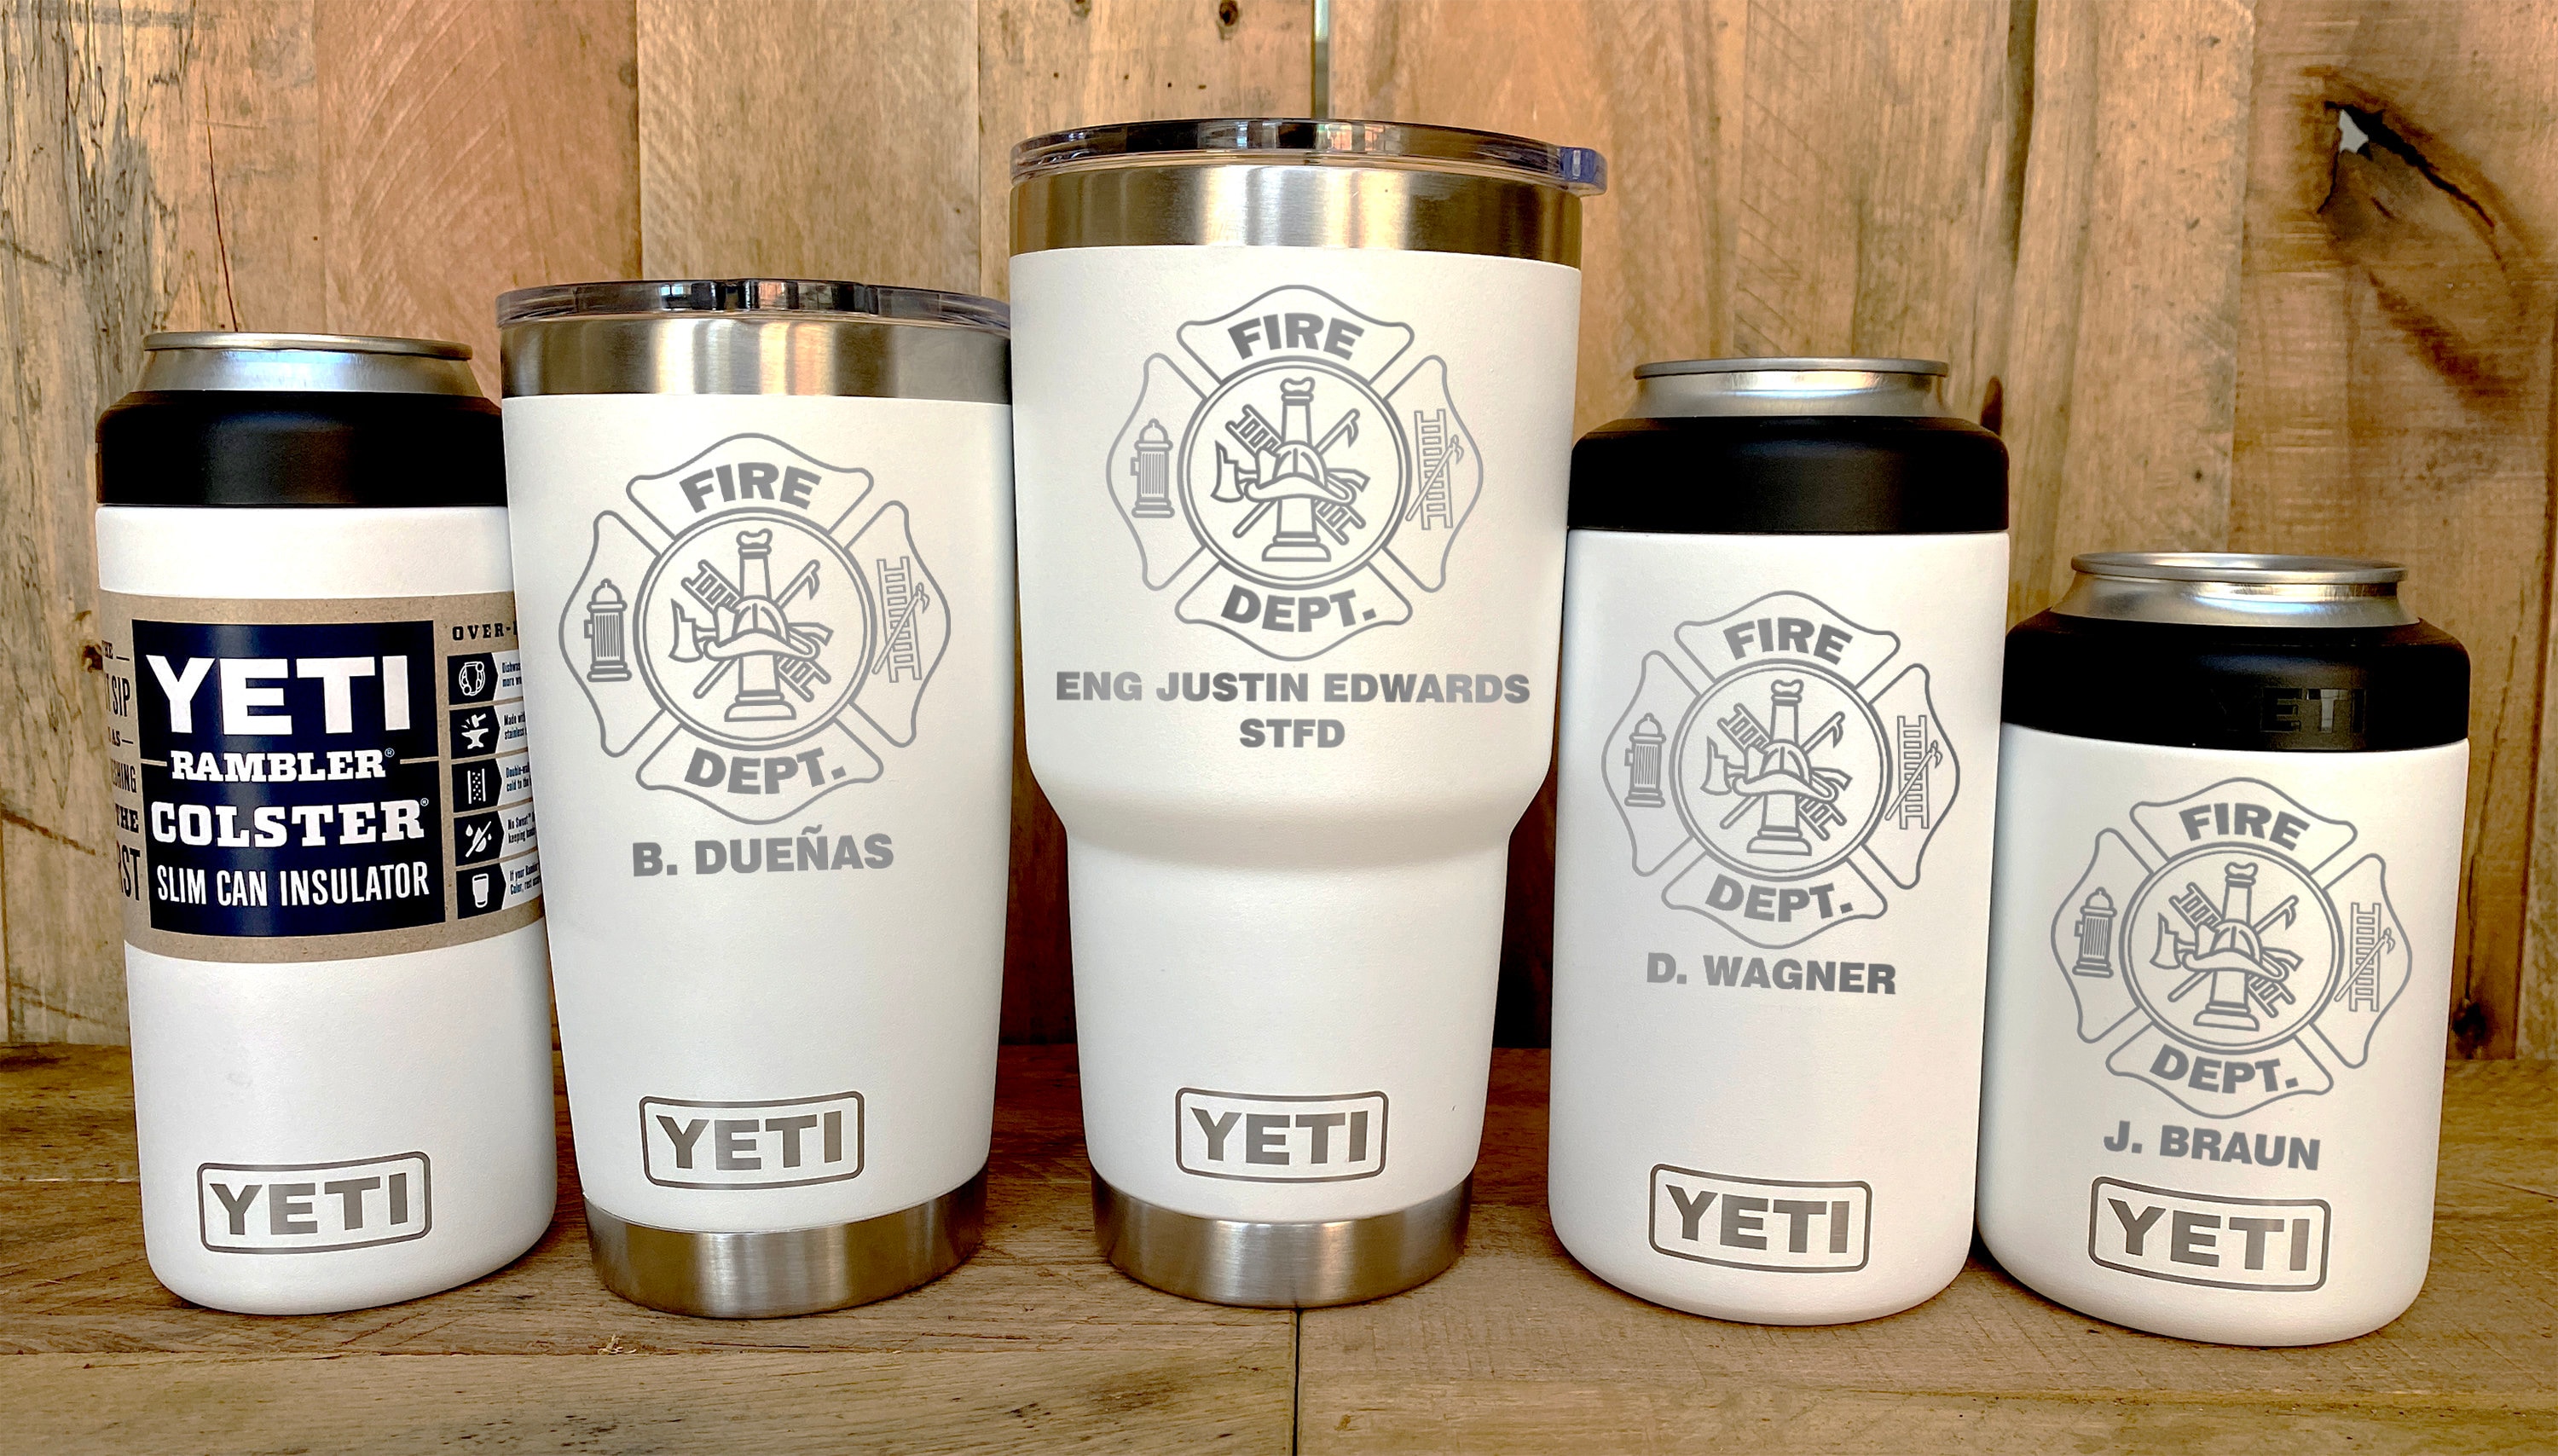 NOTRE DAME Fighting Irish YETI Laser Engraved Tumblers, Colsters and Bottles